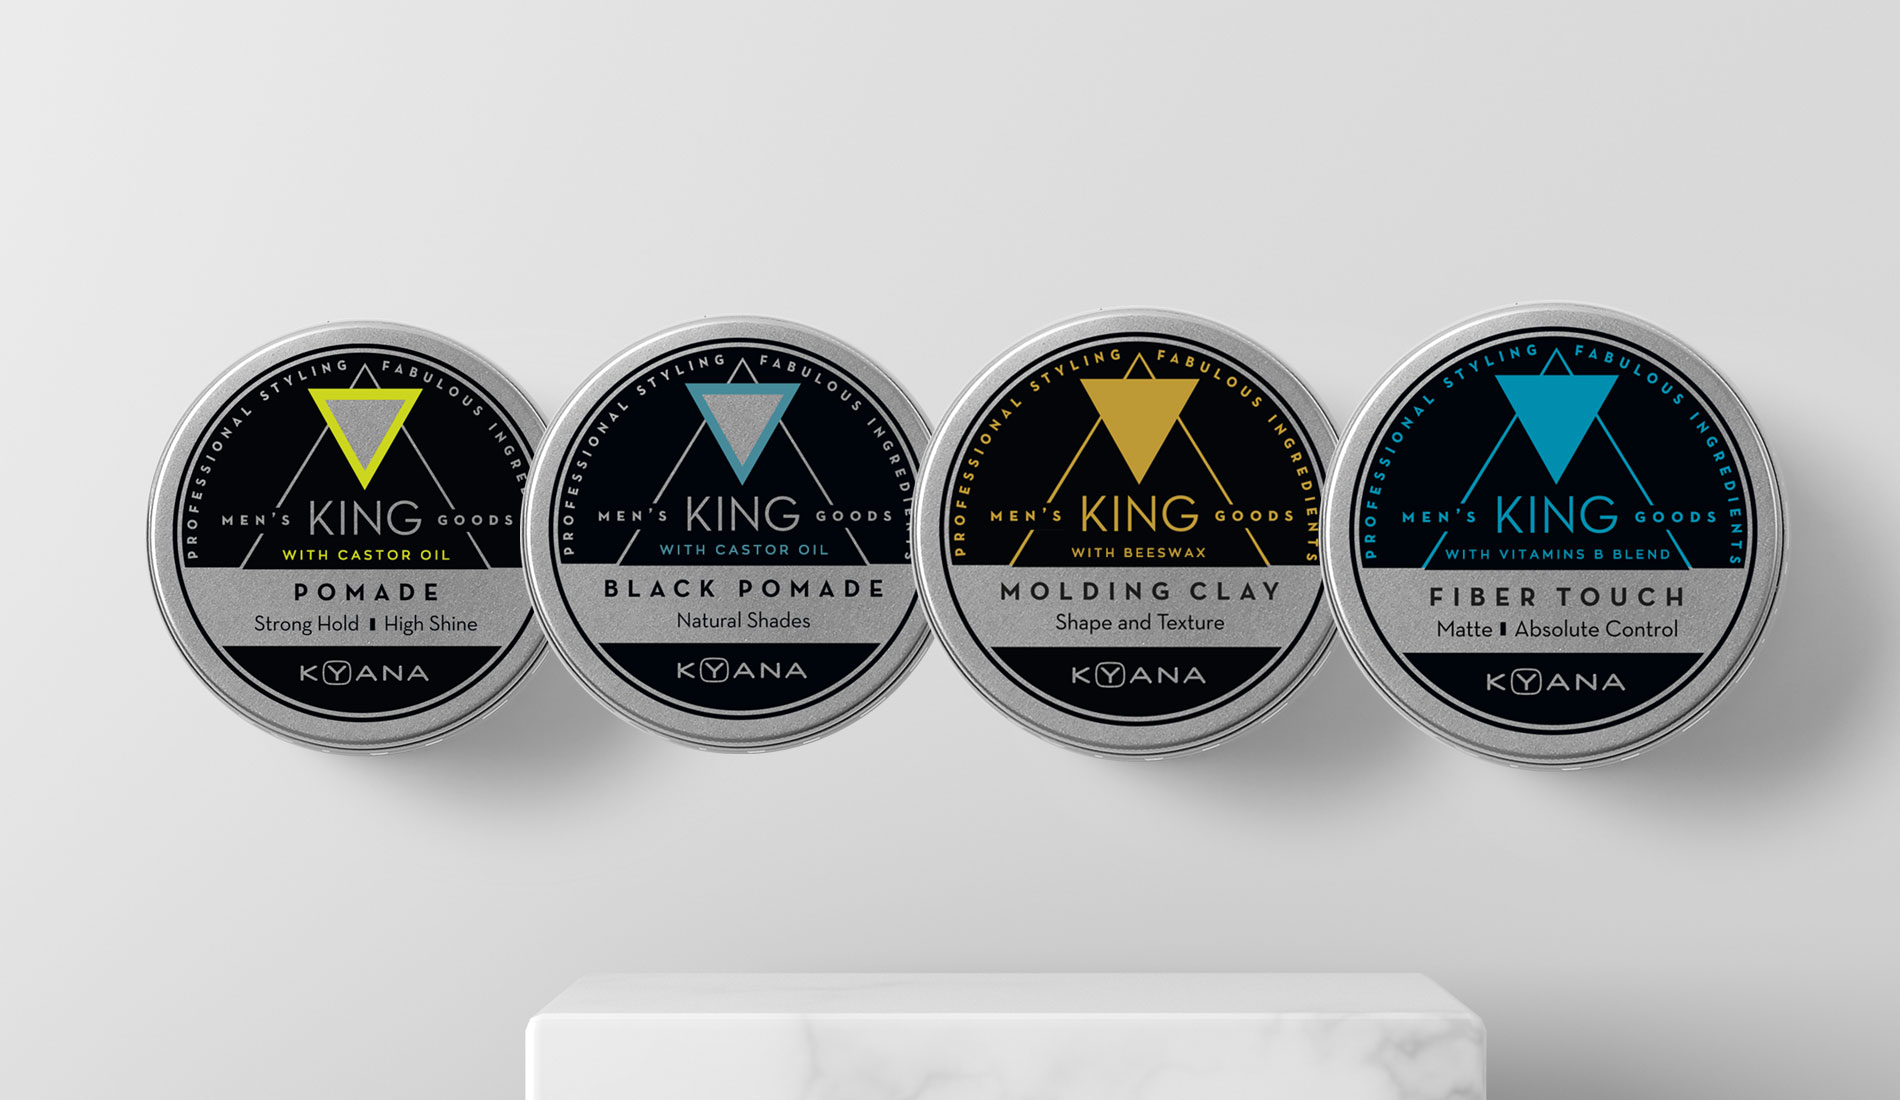 KYANA KING Subline Products